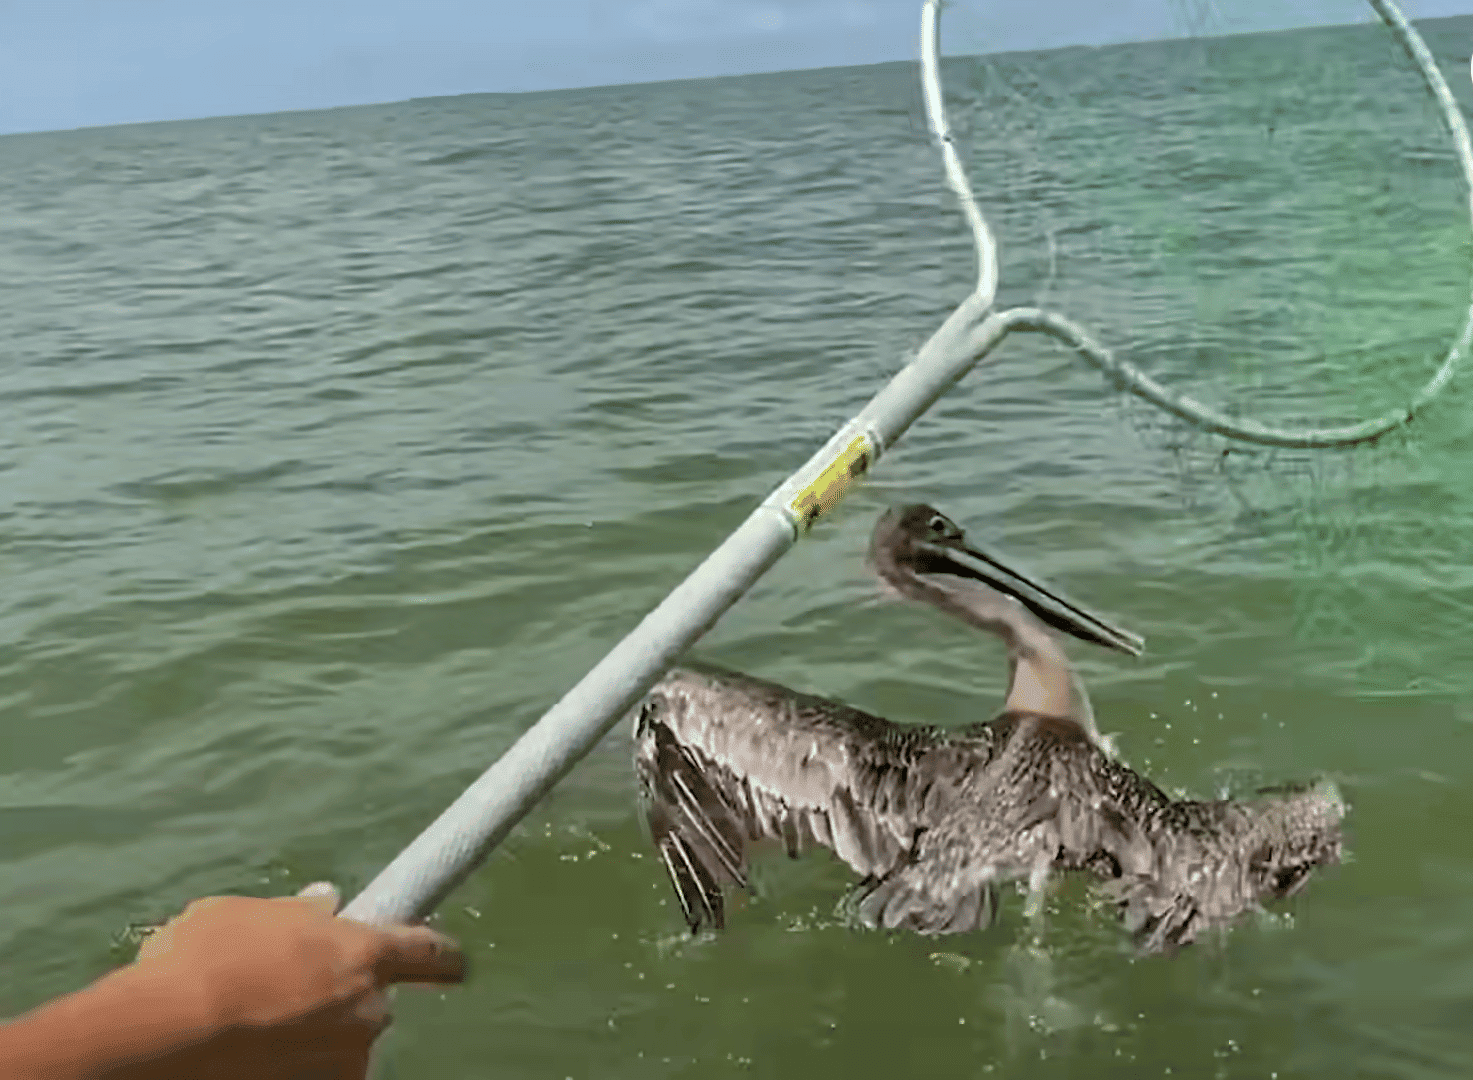 Pelican is captured by a net to be saved from fishing line